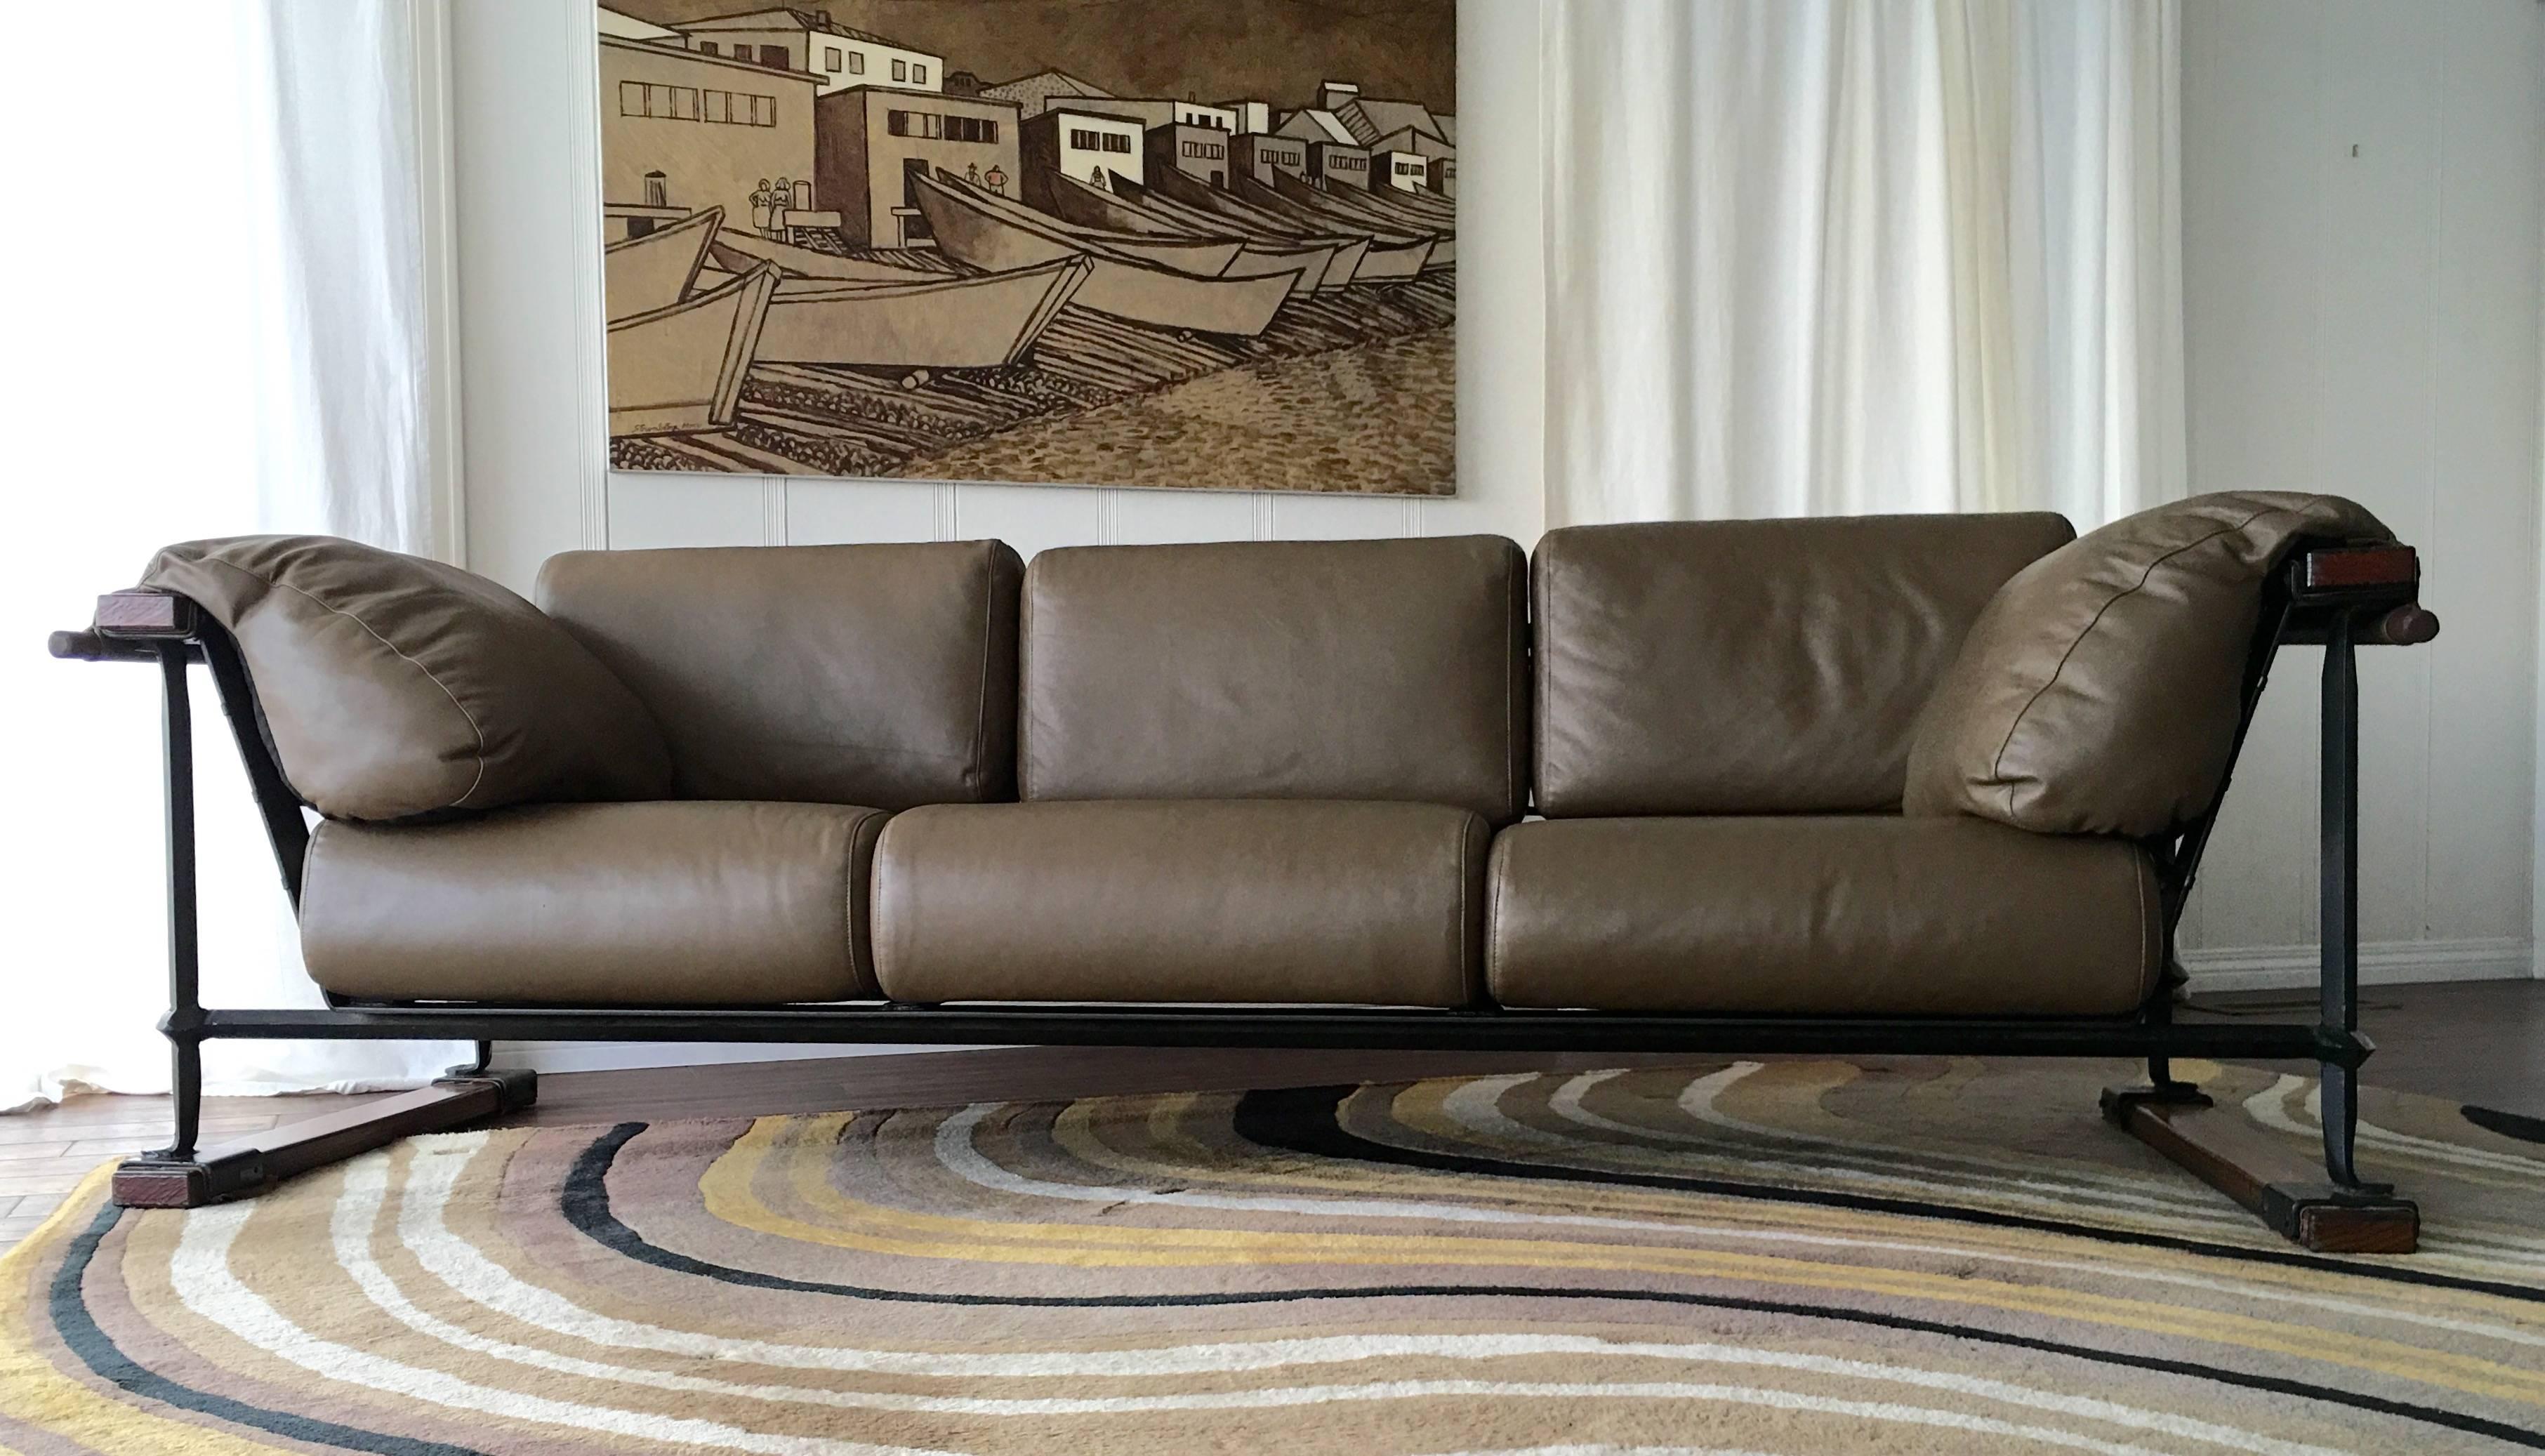 Cleo Baldon Handcrafted 8' Leather Sofa for Terra, circa 1965 In Good Condition For Sale In Camden, ME